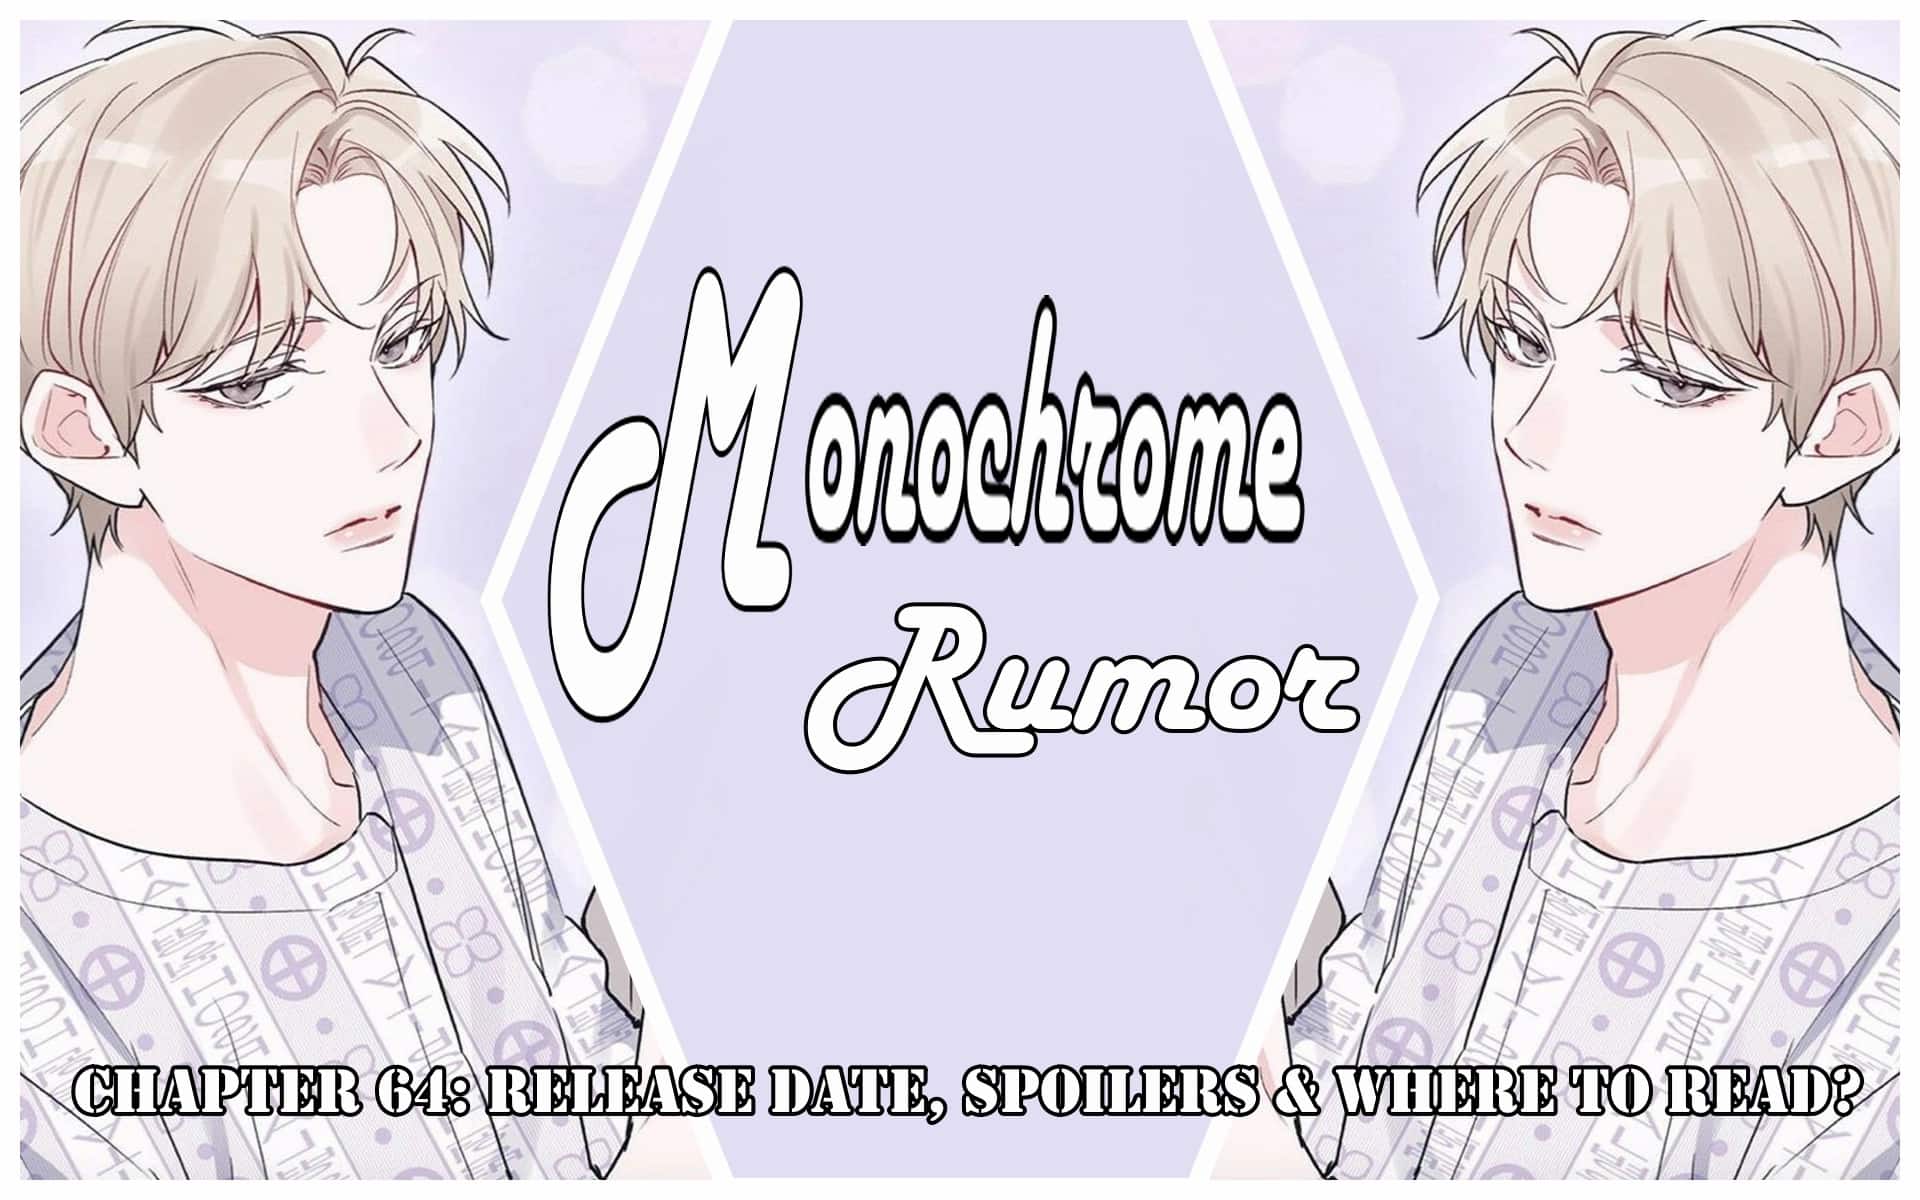 Monochrome Rumor Chapter 64: Release Date, Spoilers & Where to Read?